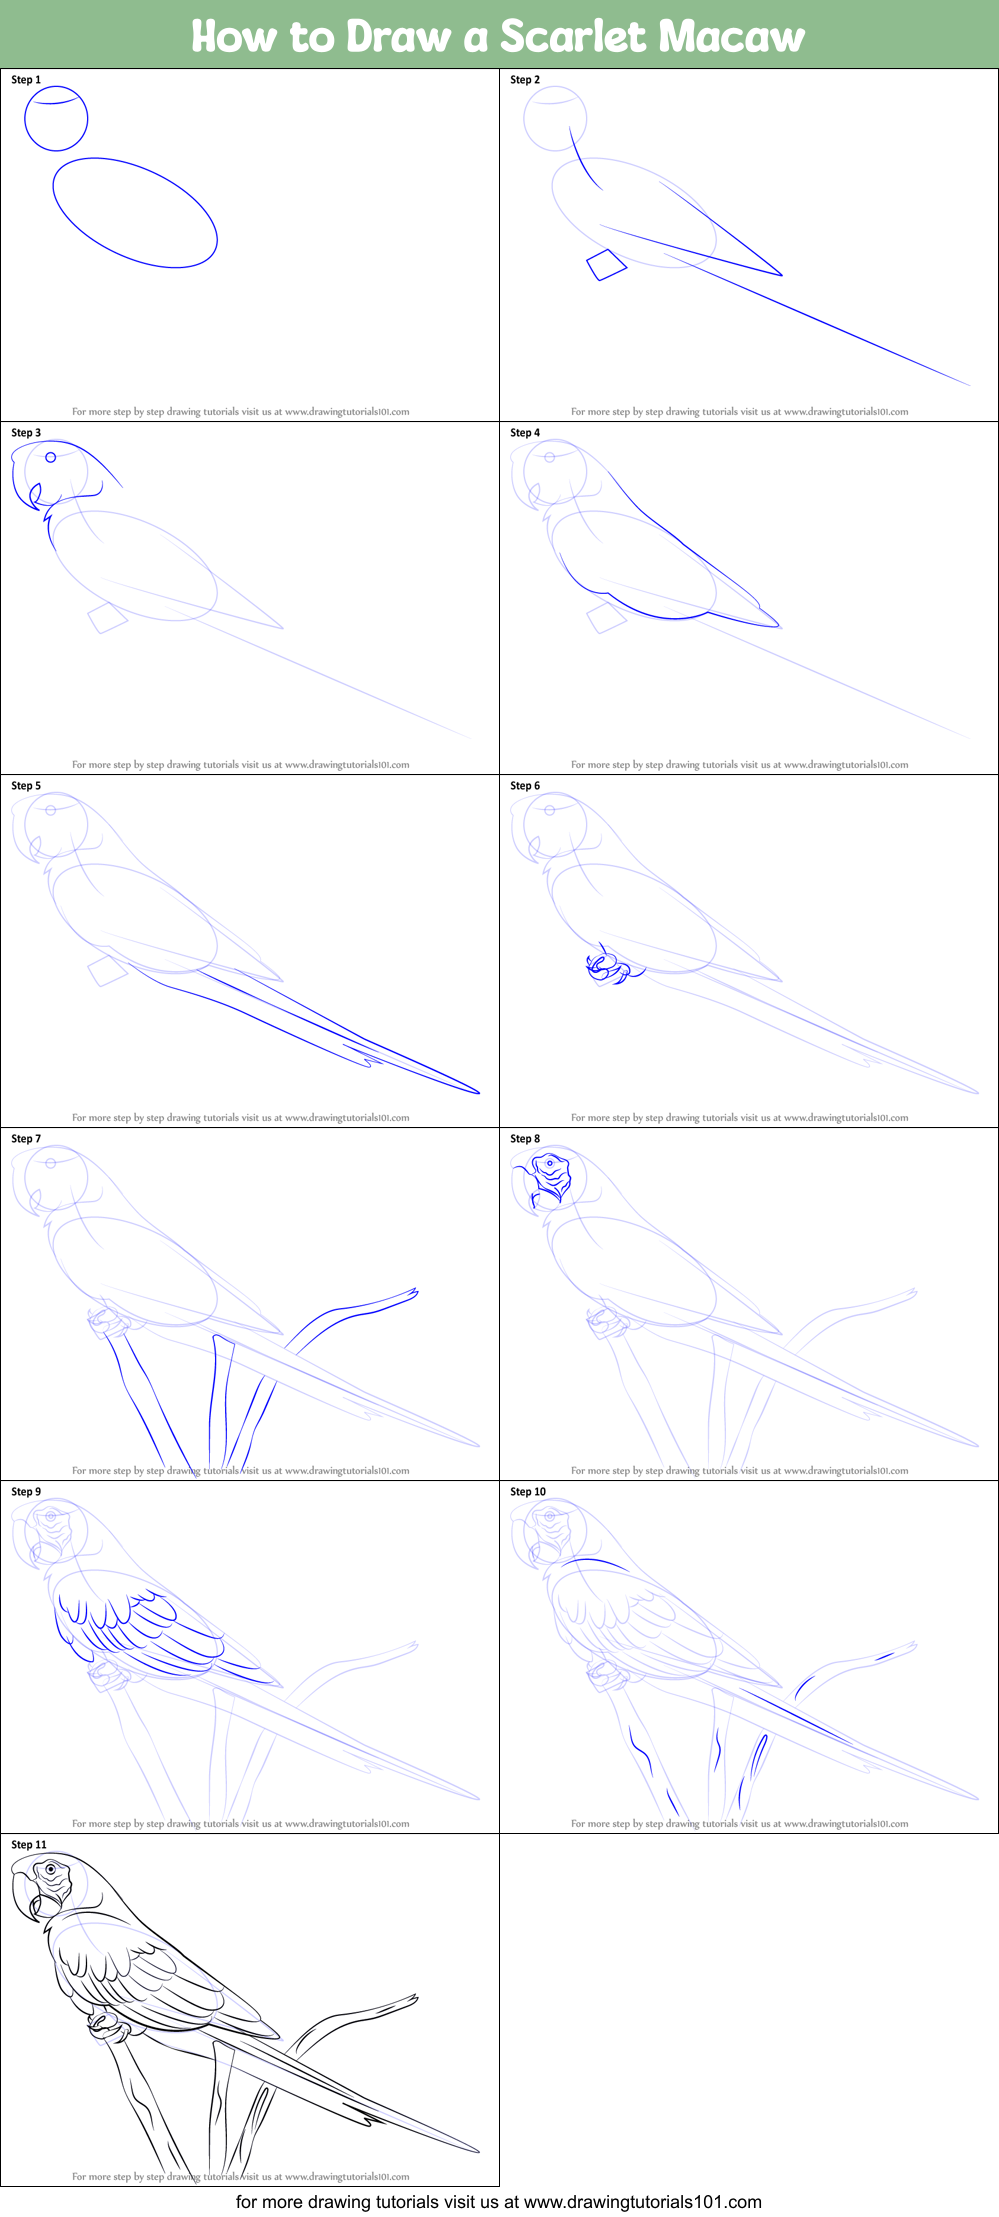 How to Draw a Scarlet Macaw printable step by step drawing sheet